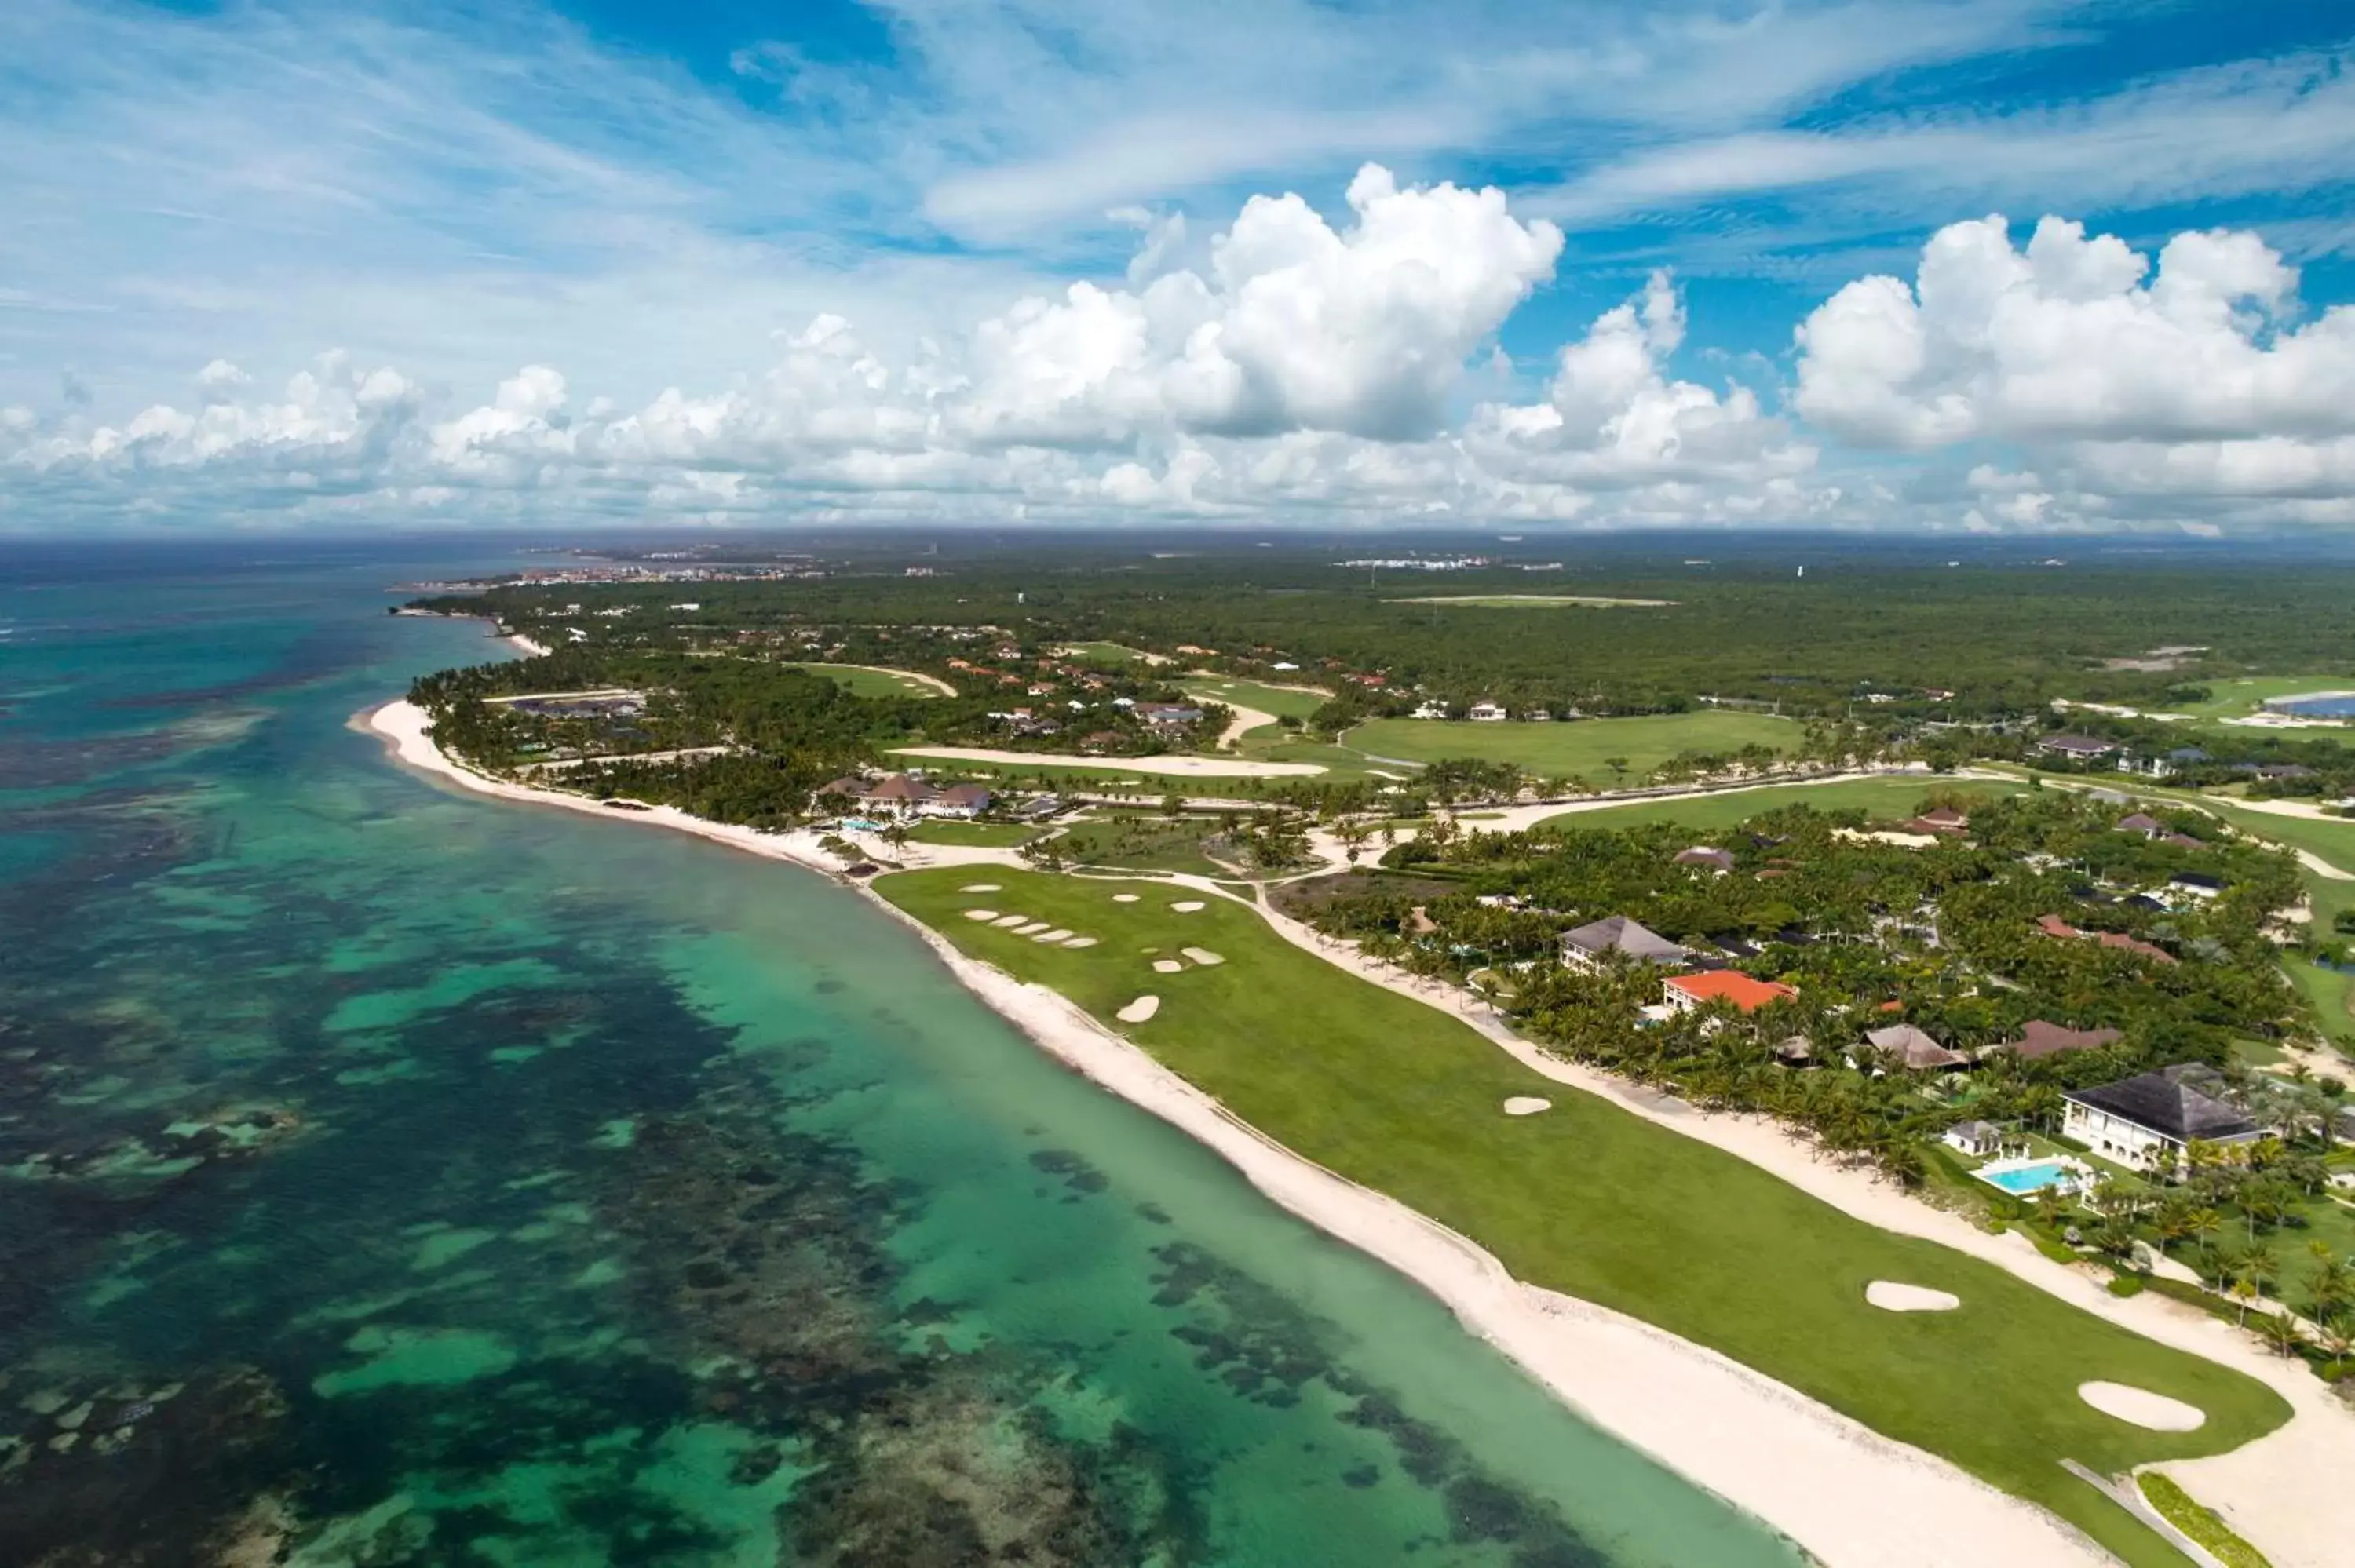 Off site, Bird's-eye View in Tortuga Bay